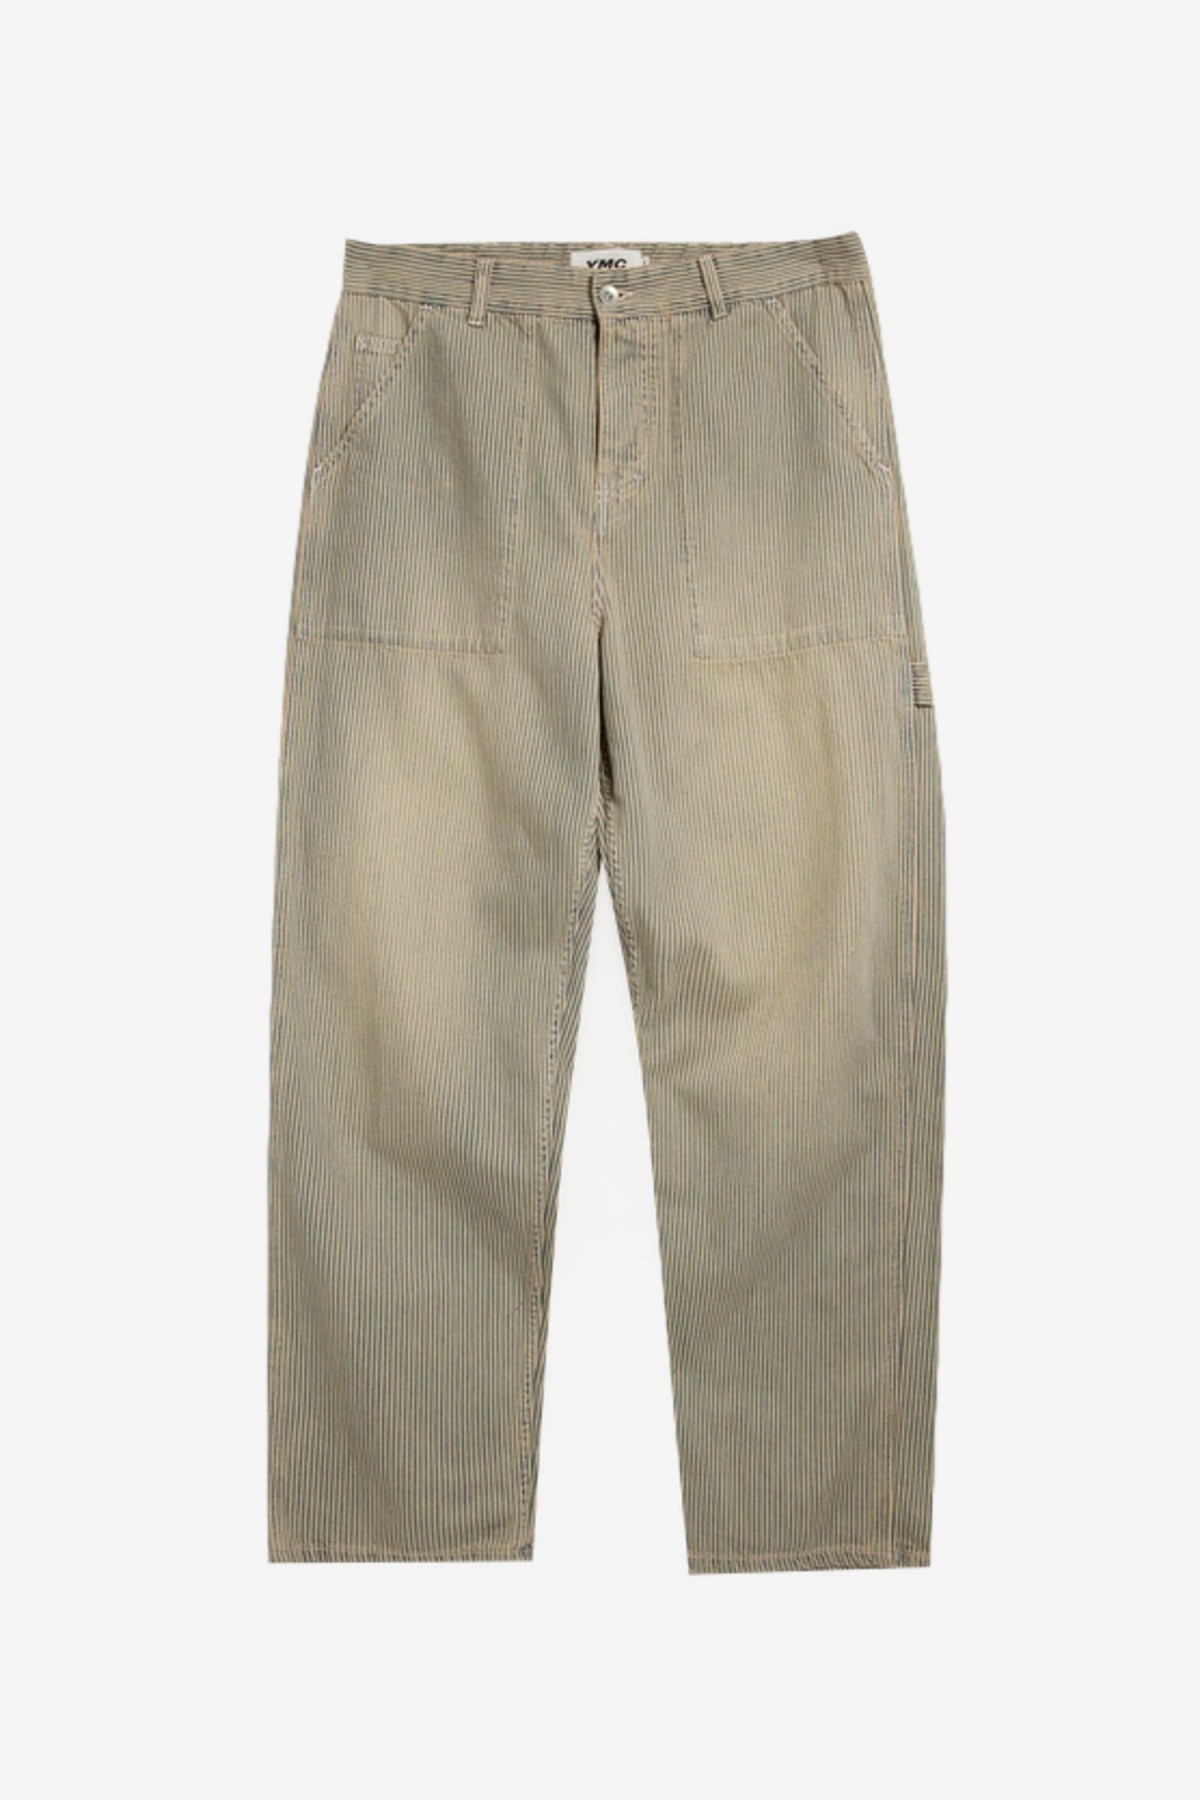 YMC You Must Create Painter Trouser in Navy/Brown